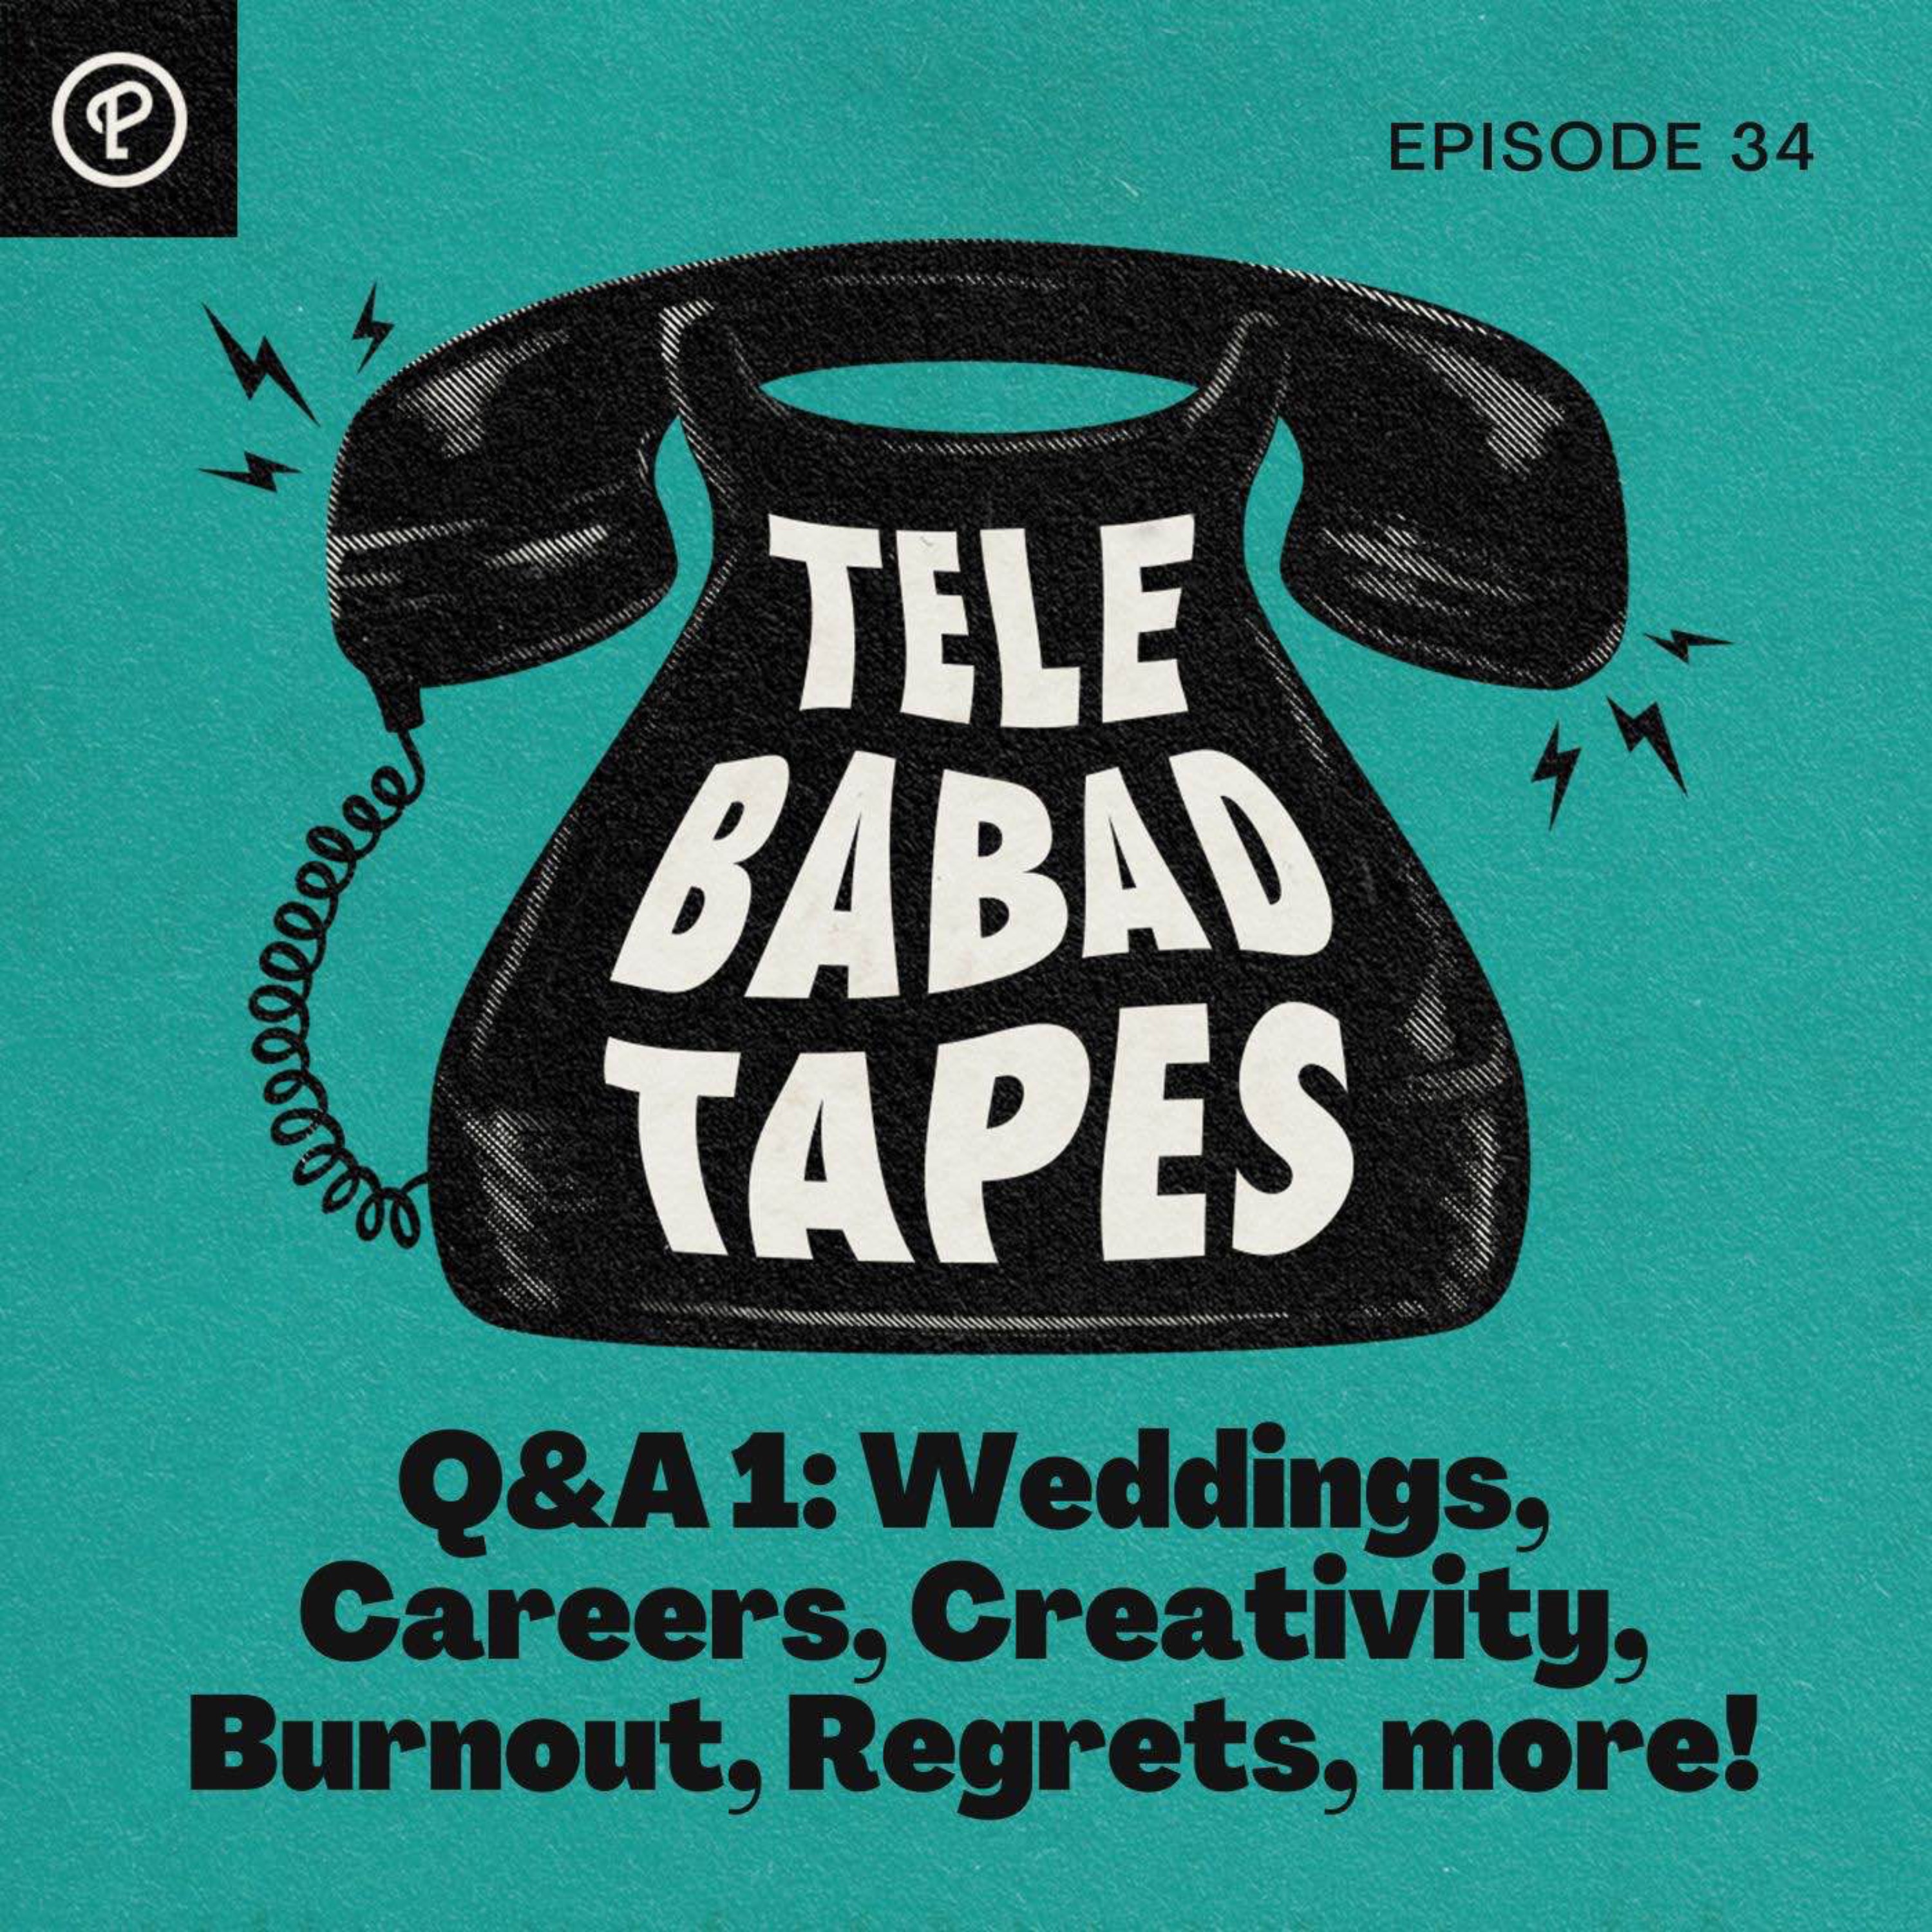 Episode 34: Q&A Volume 1 - Weddings, Careers, Creativity, Burnout, Regrets, many more!